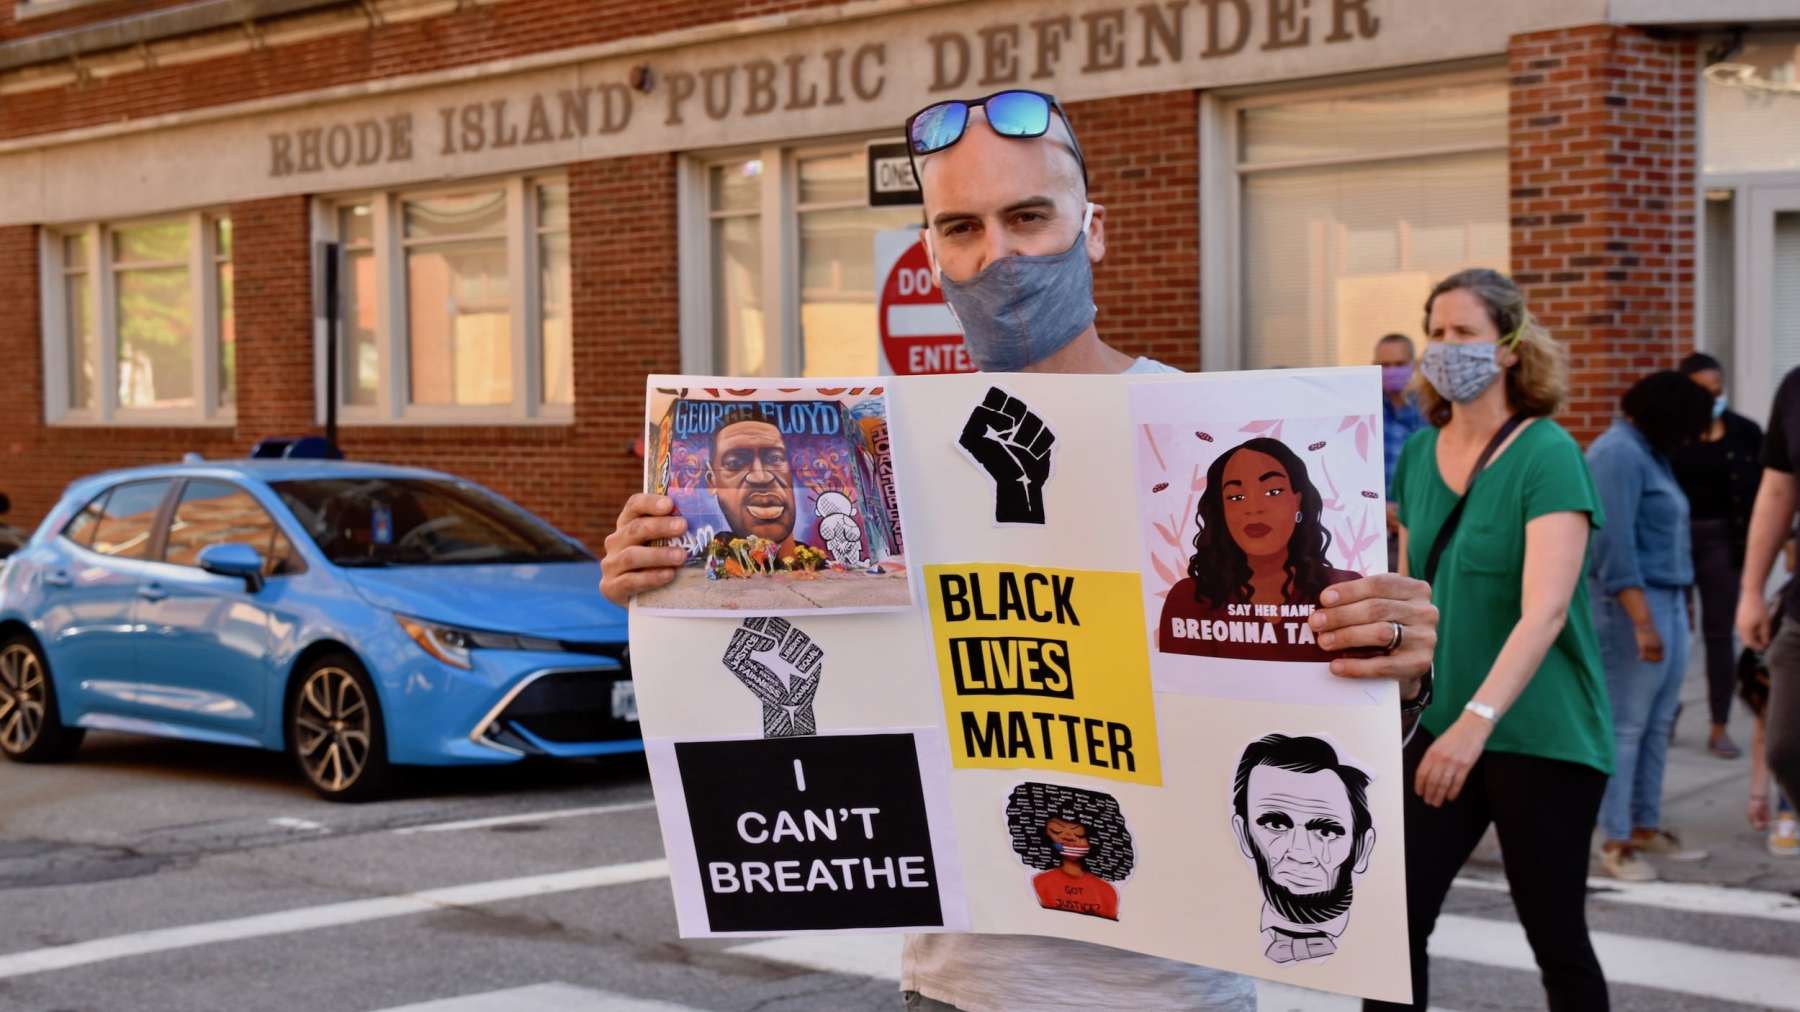 Rhode Island Public Defender’s office marches for George Floyd and Black Lives